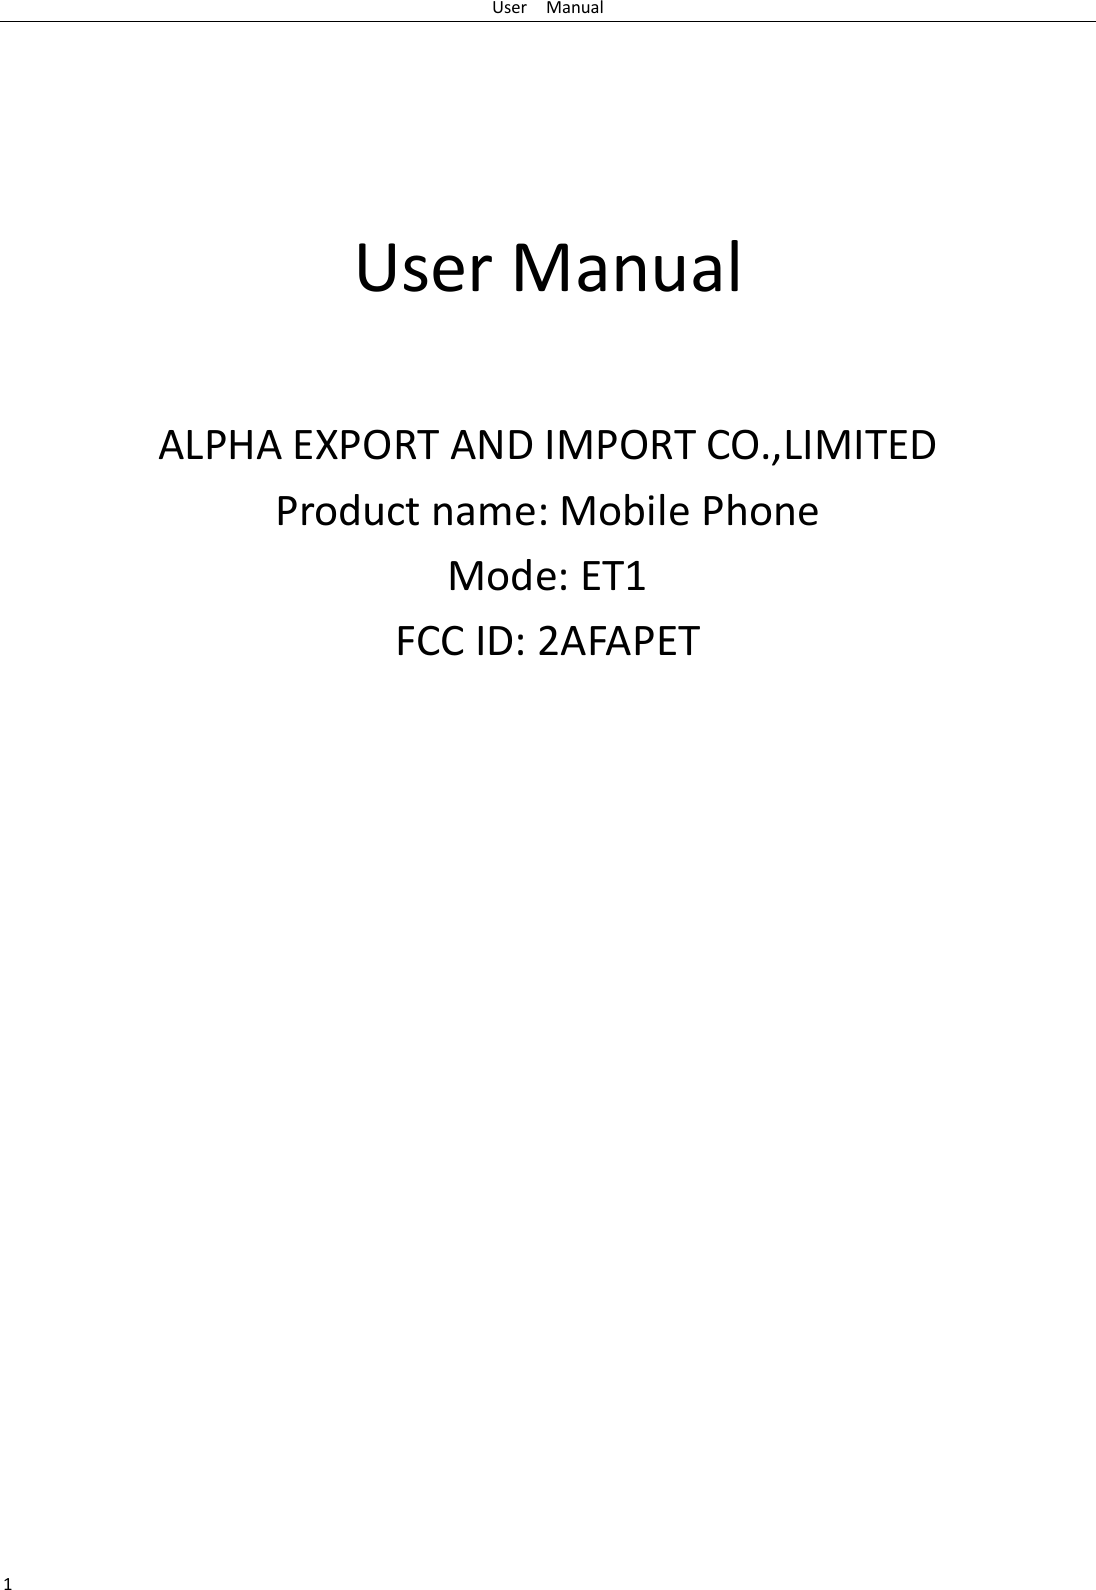 User  Manual 1     User Manual  ALPHA EXPORT AND IMPORT CO.,LIMITED   Product name: Mobile Phone Mode: ET1 FCC ID: 2AFAPET 